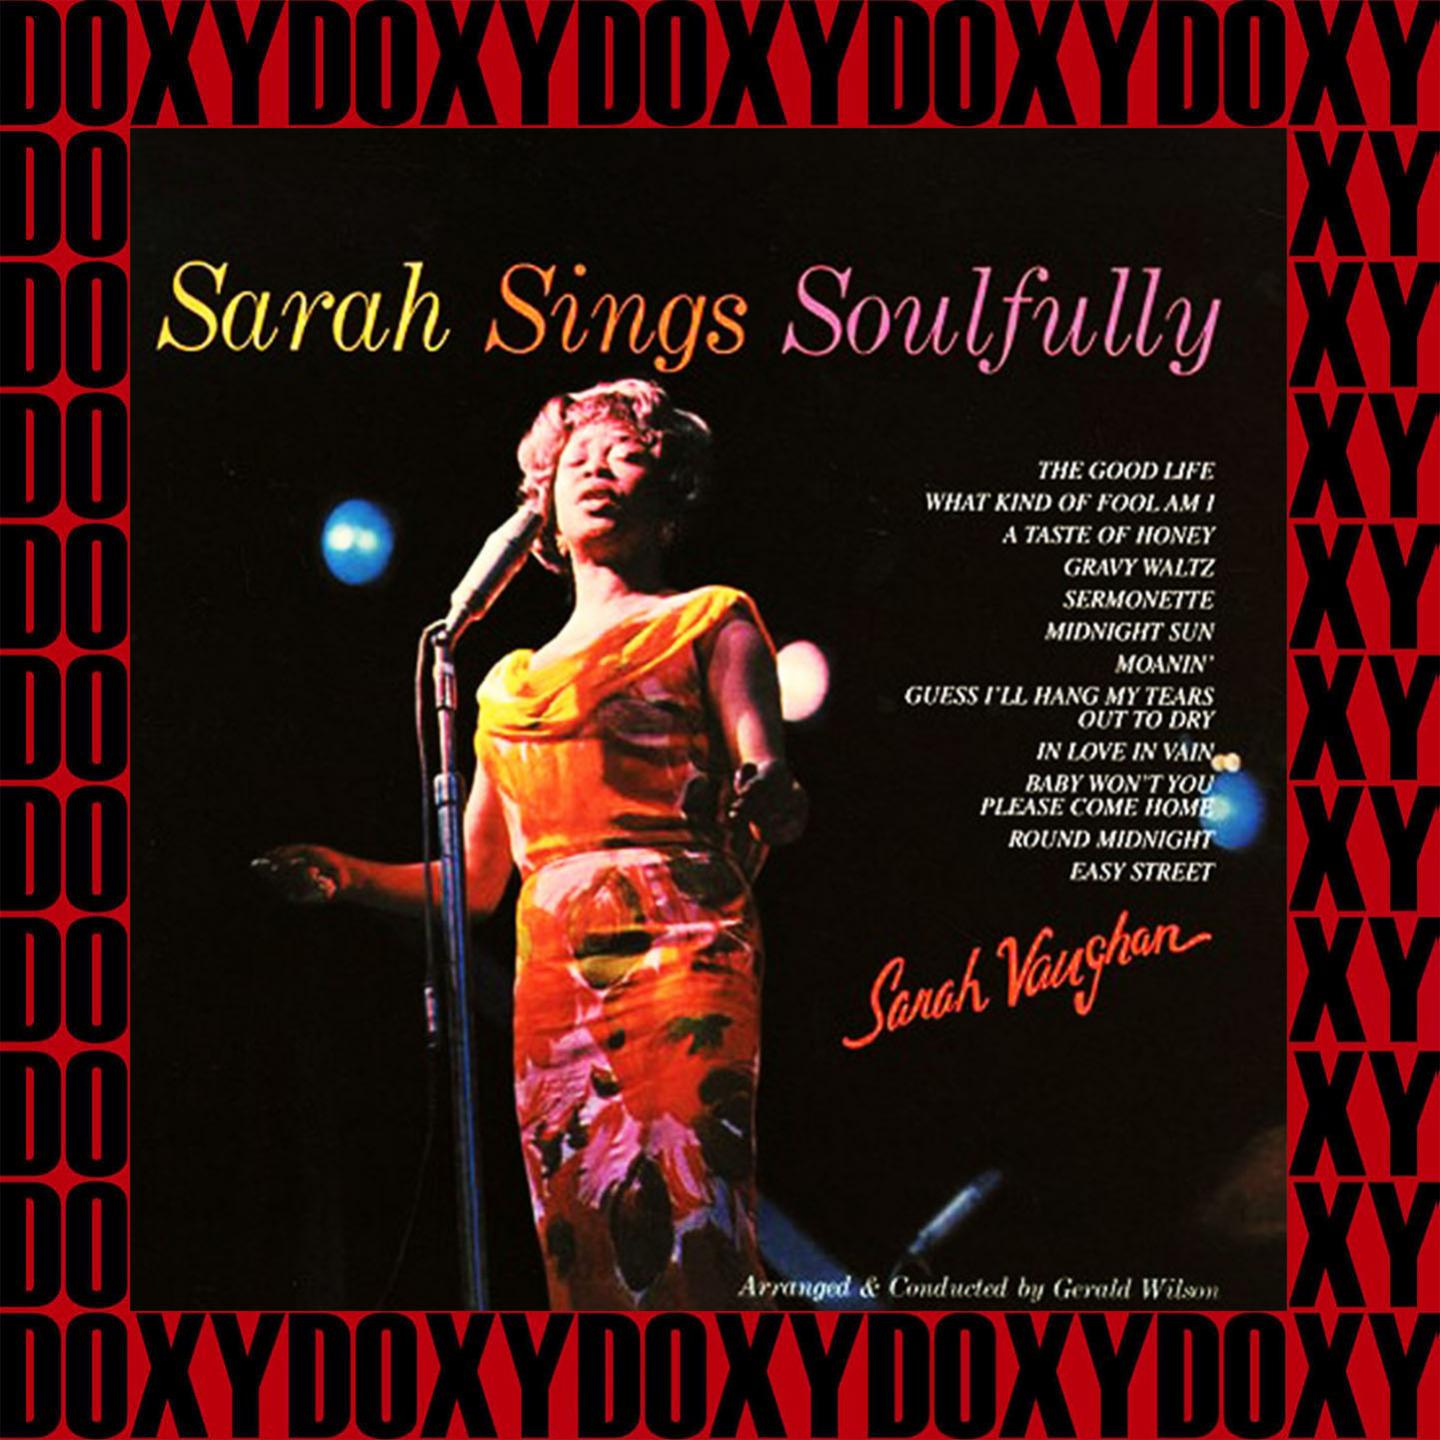 Sarah Sings Soulfully (Remastered Version) (Doxy Collection)